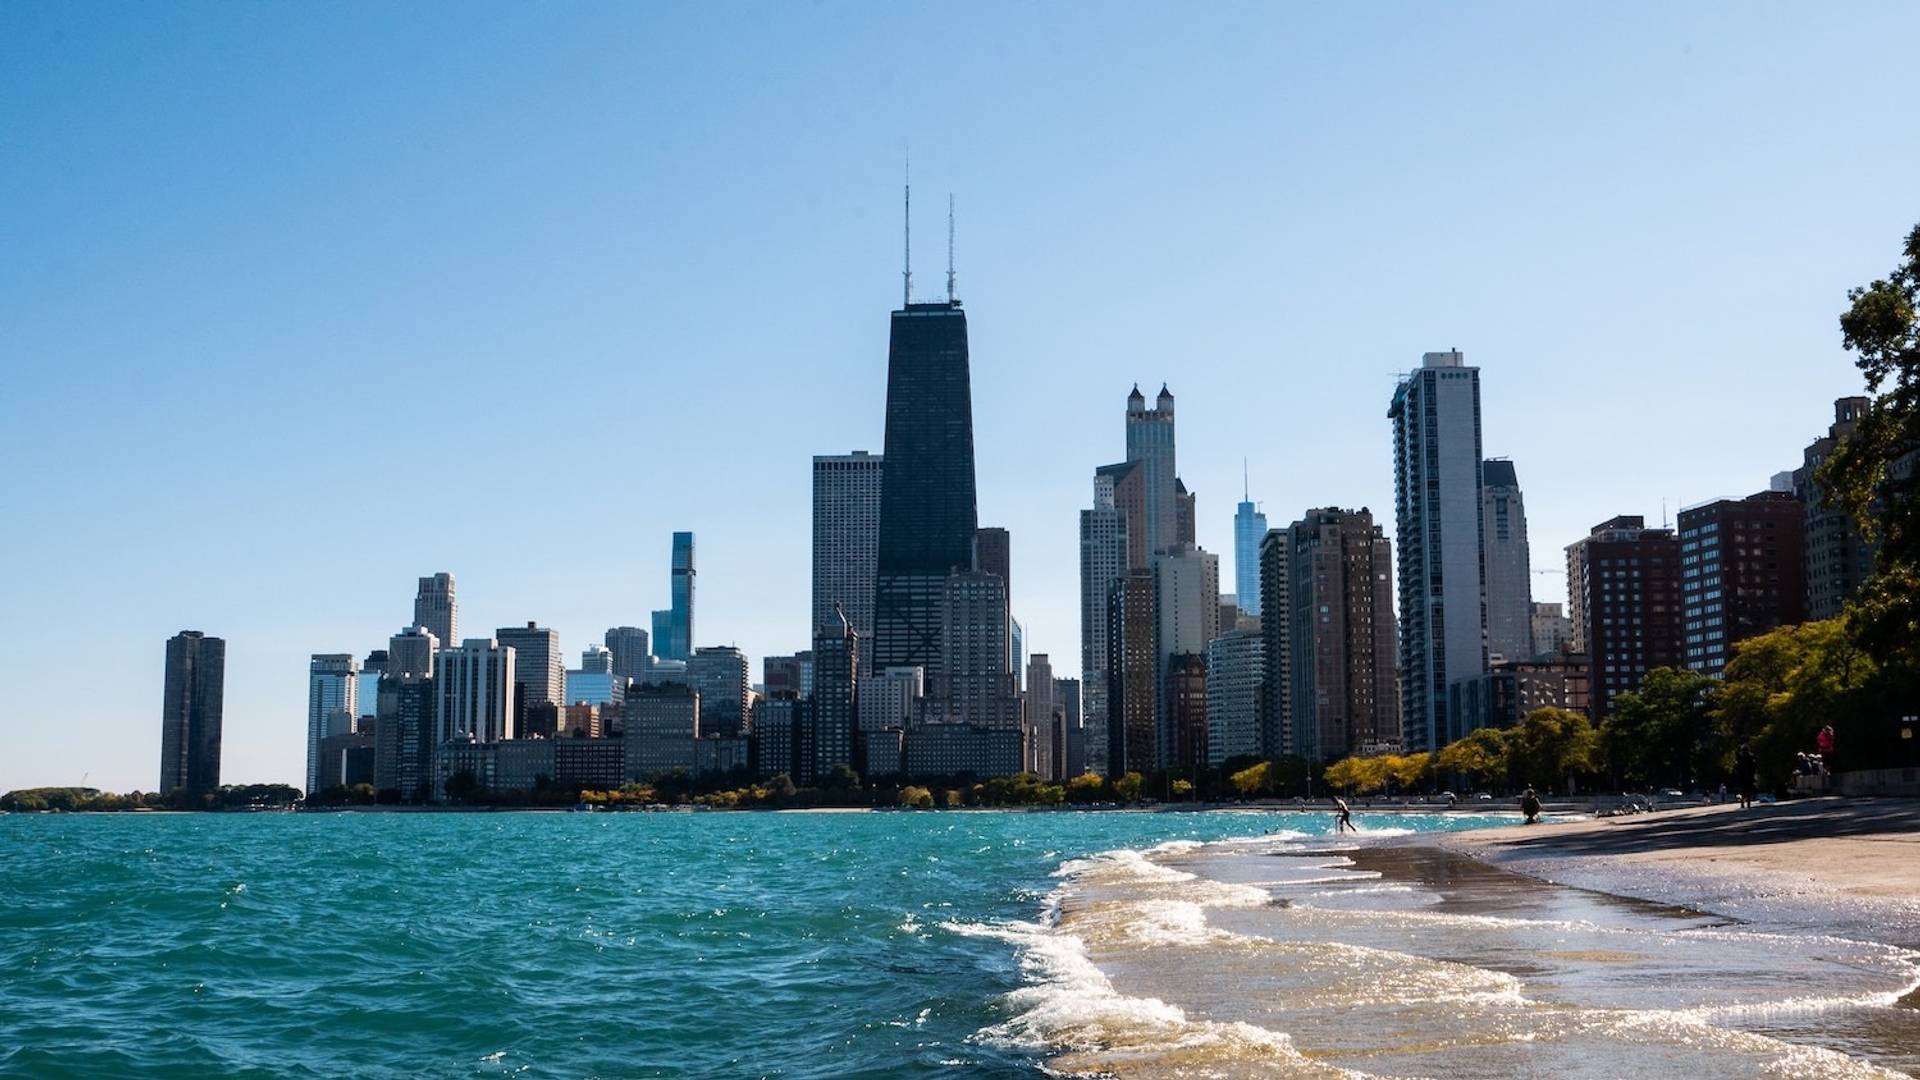 Chicago skyline and lakefront beach to represent where to buy e-bikes in Illinois